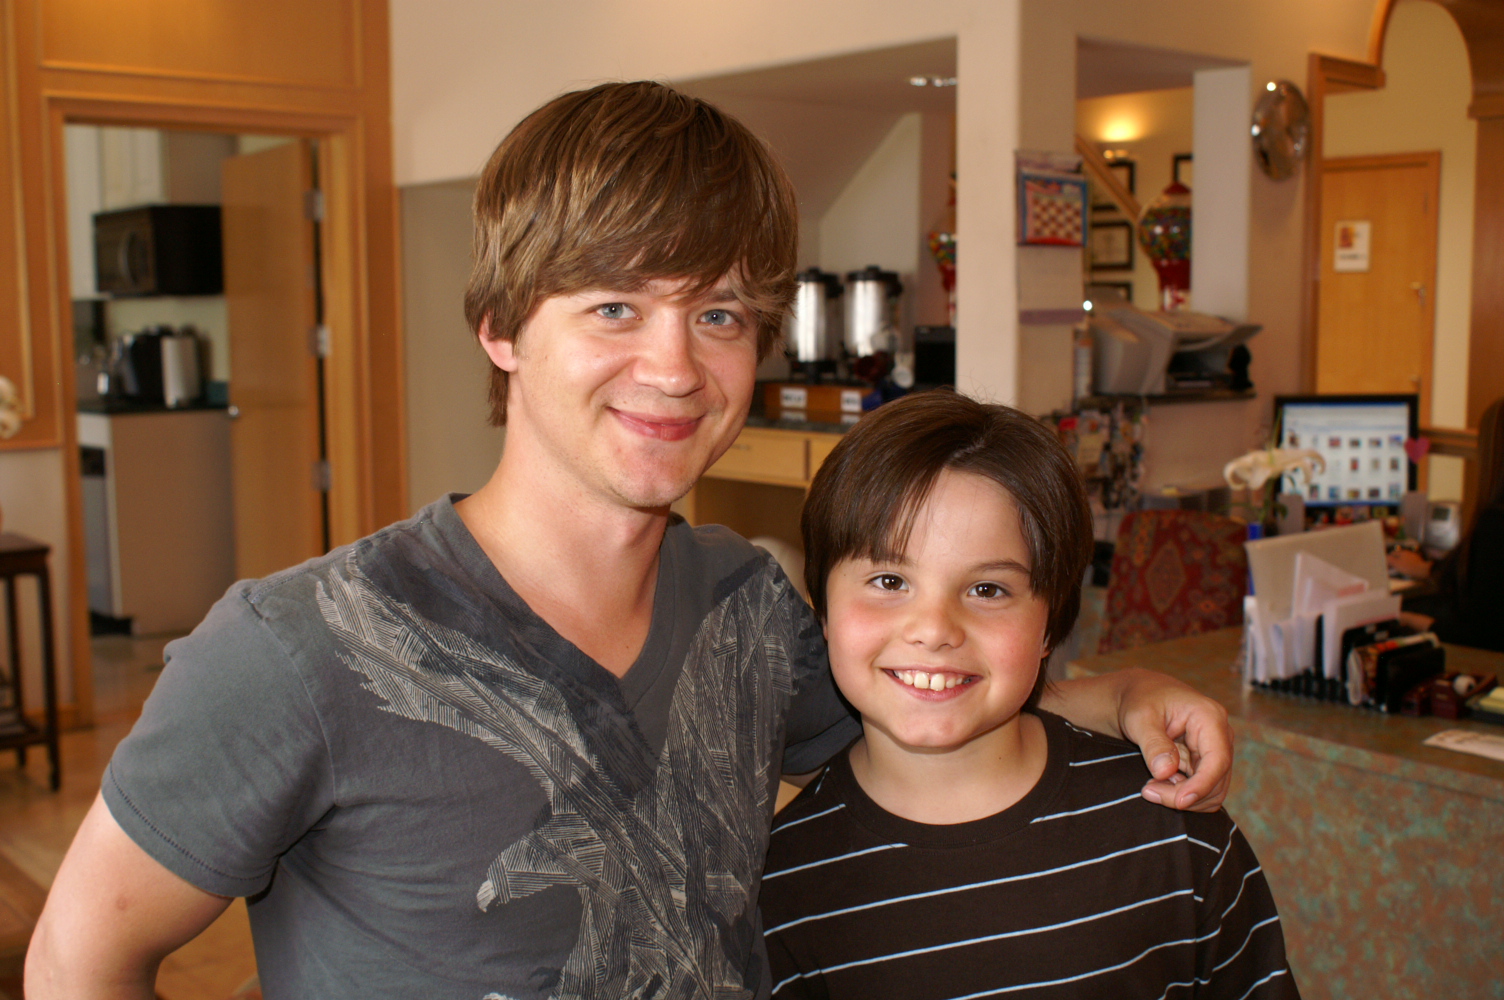 Jason Earles played bully Vance King to Zach's character Matthew Parker in Adventures in Odyssey.